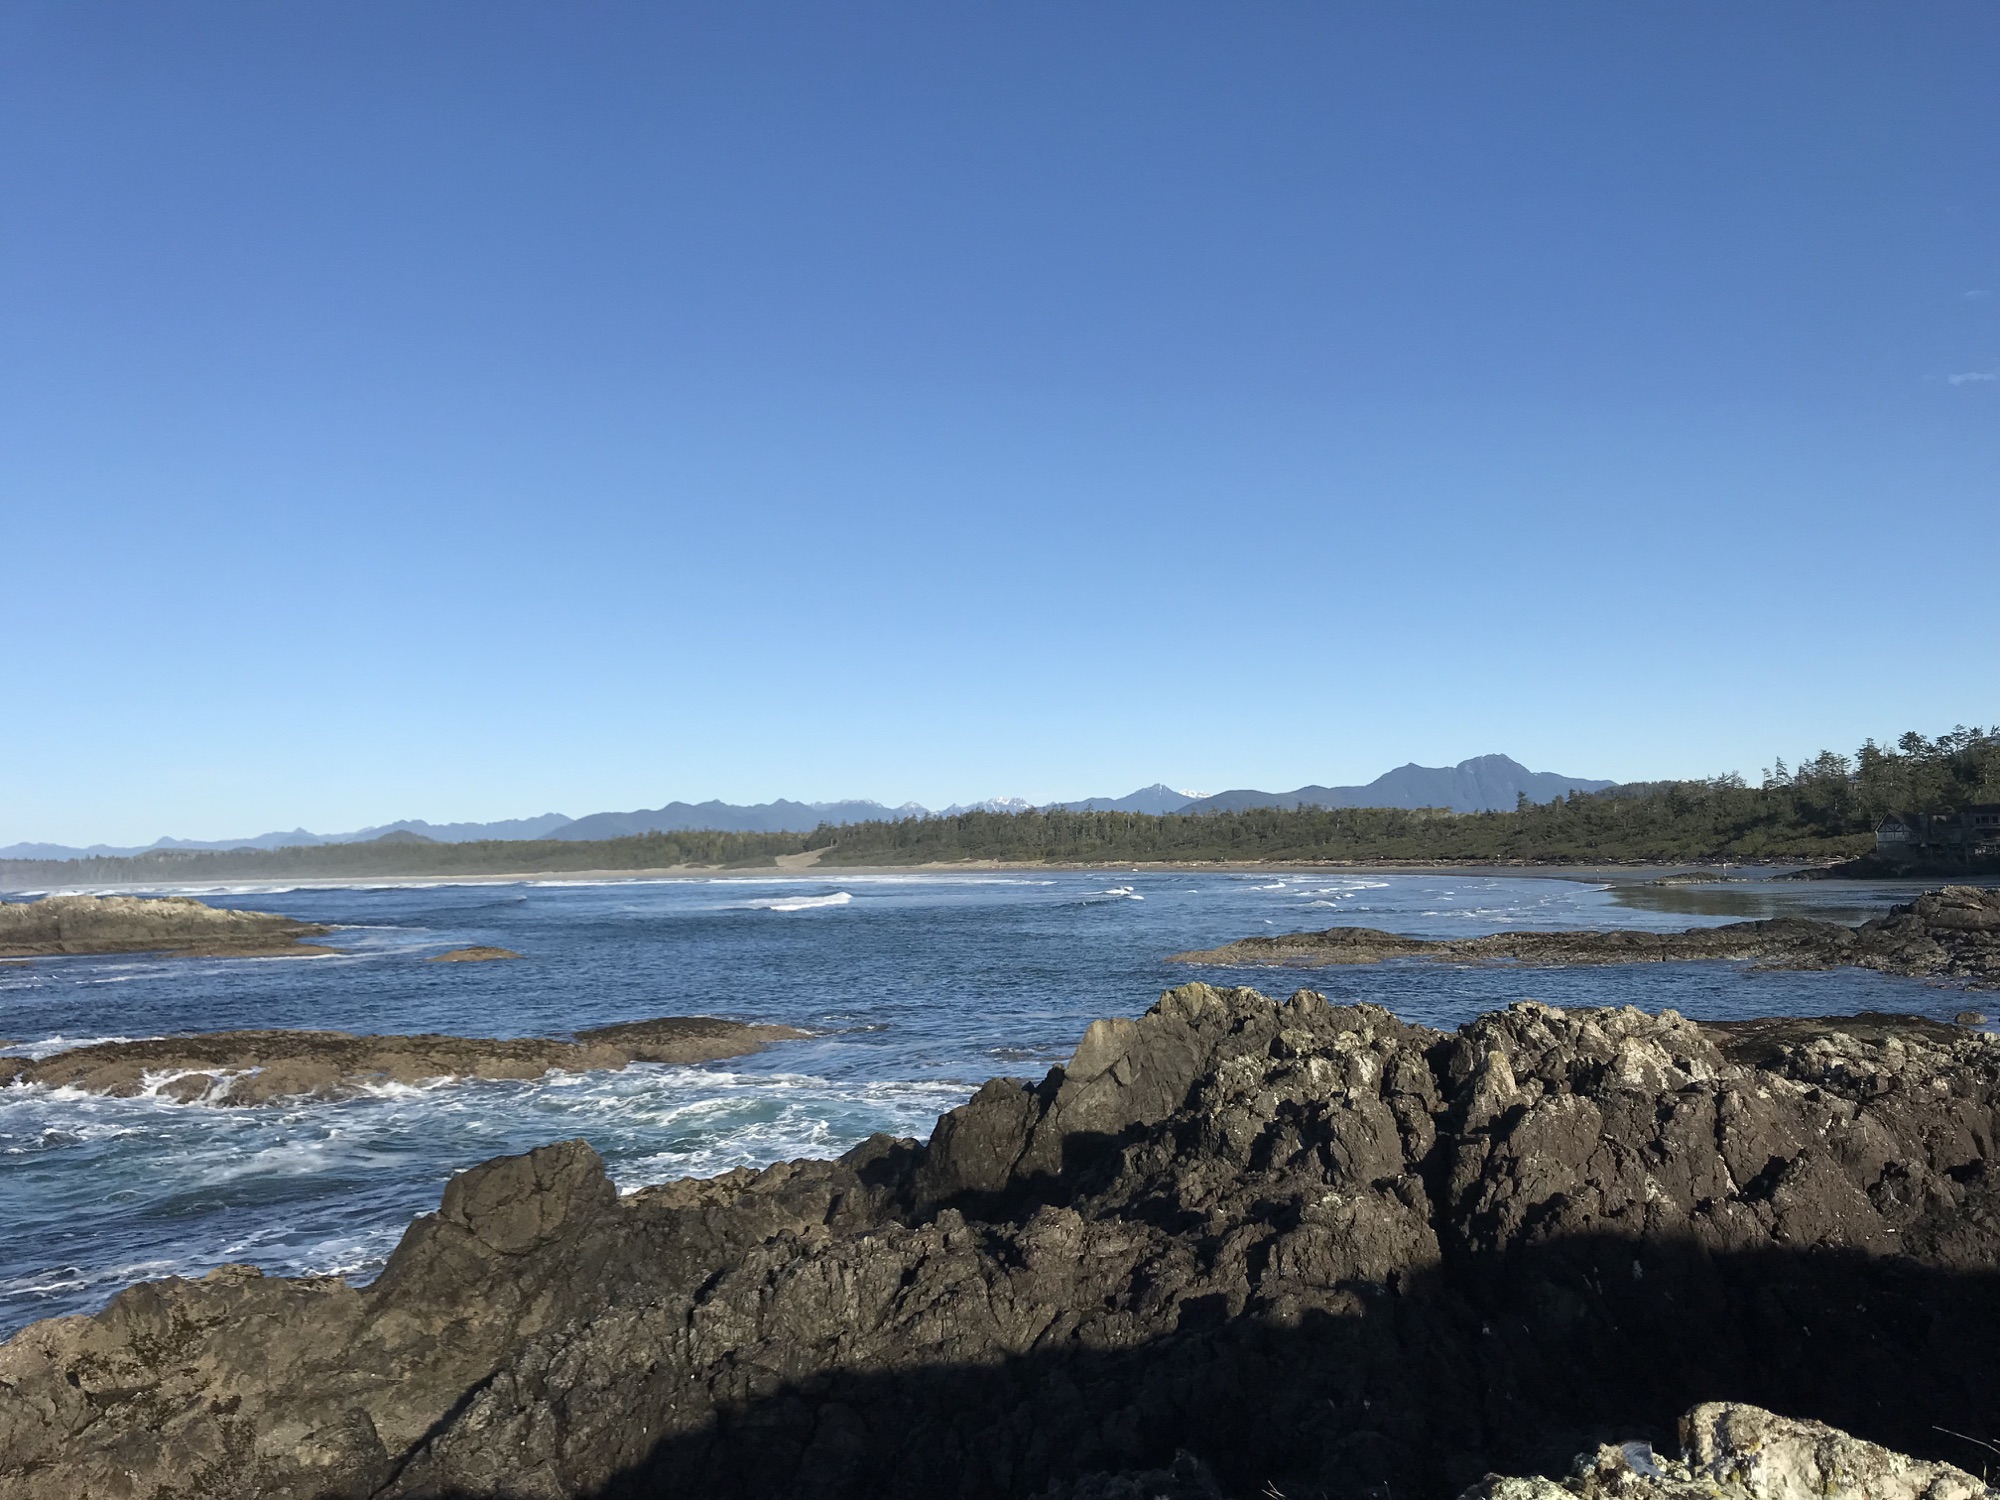 One of the beaches of Vancouver Island